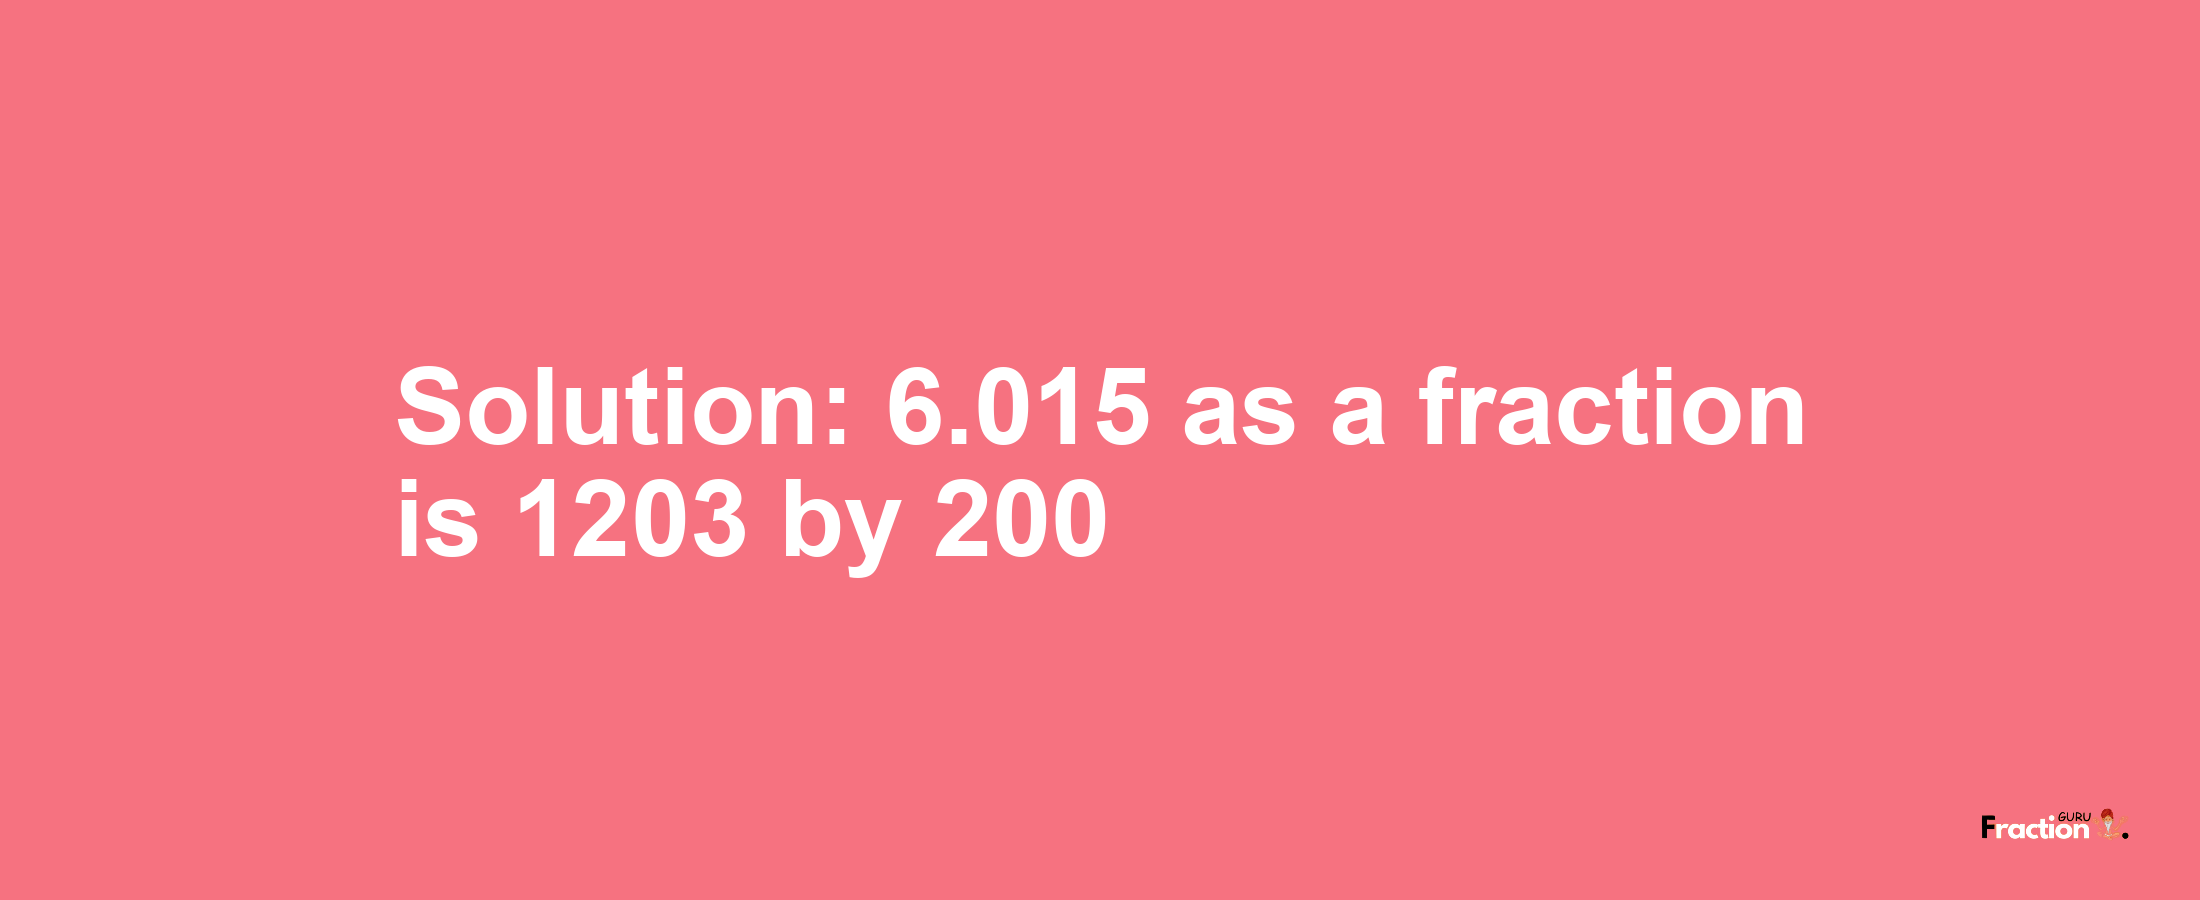 Solution:6.015 as a fraction is 1203/200